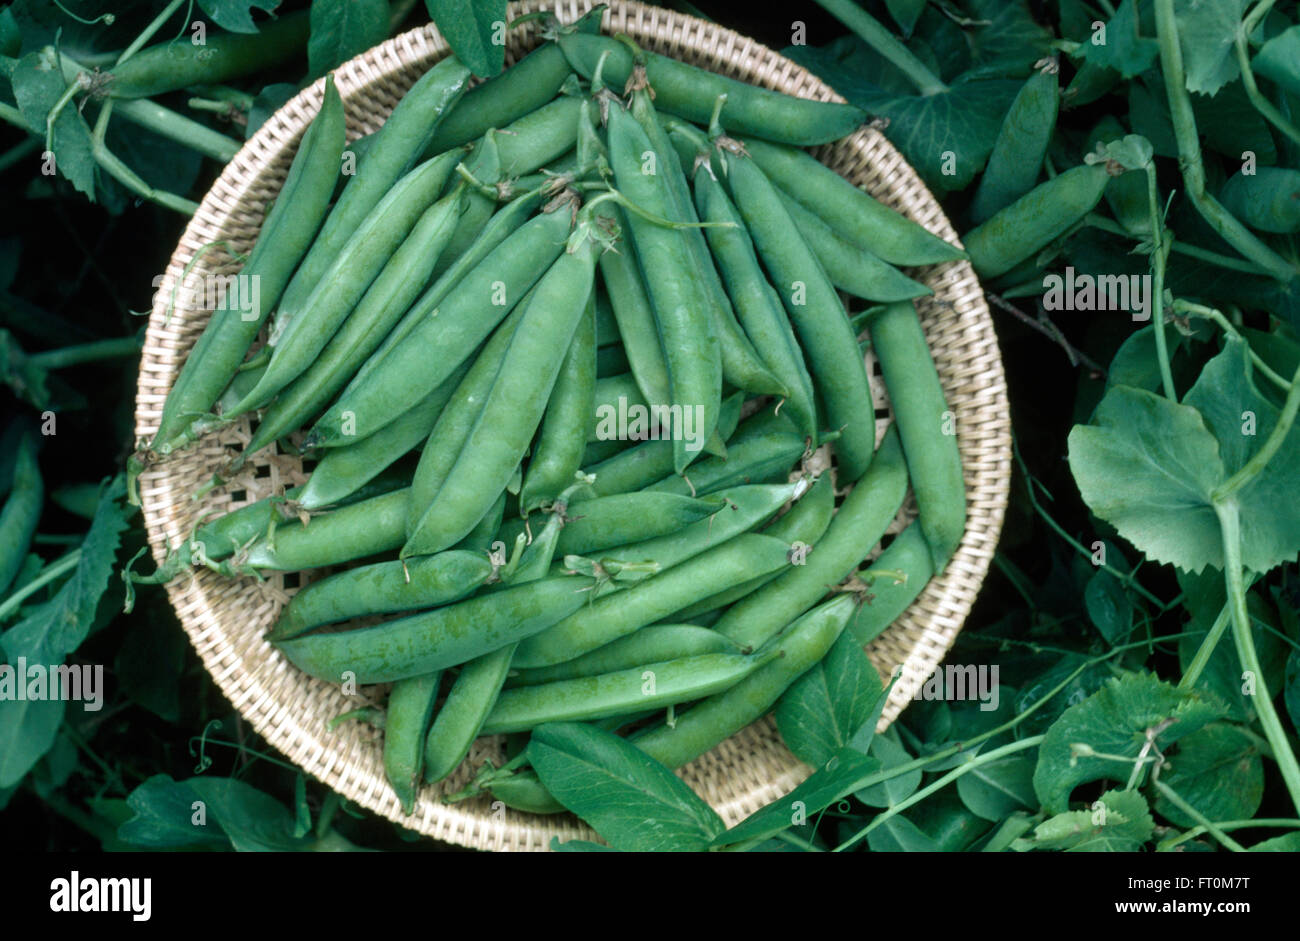 Close-up of a basket of freshly picked peas Stock Photo